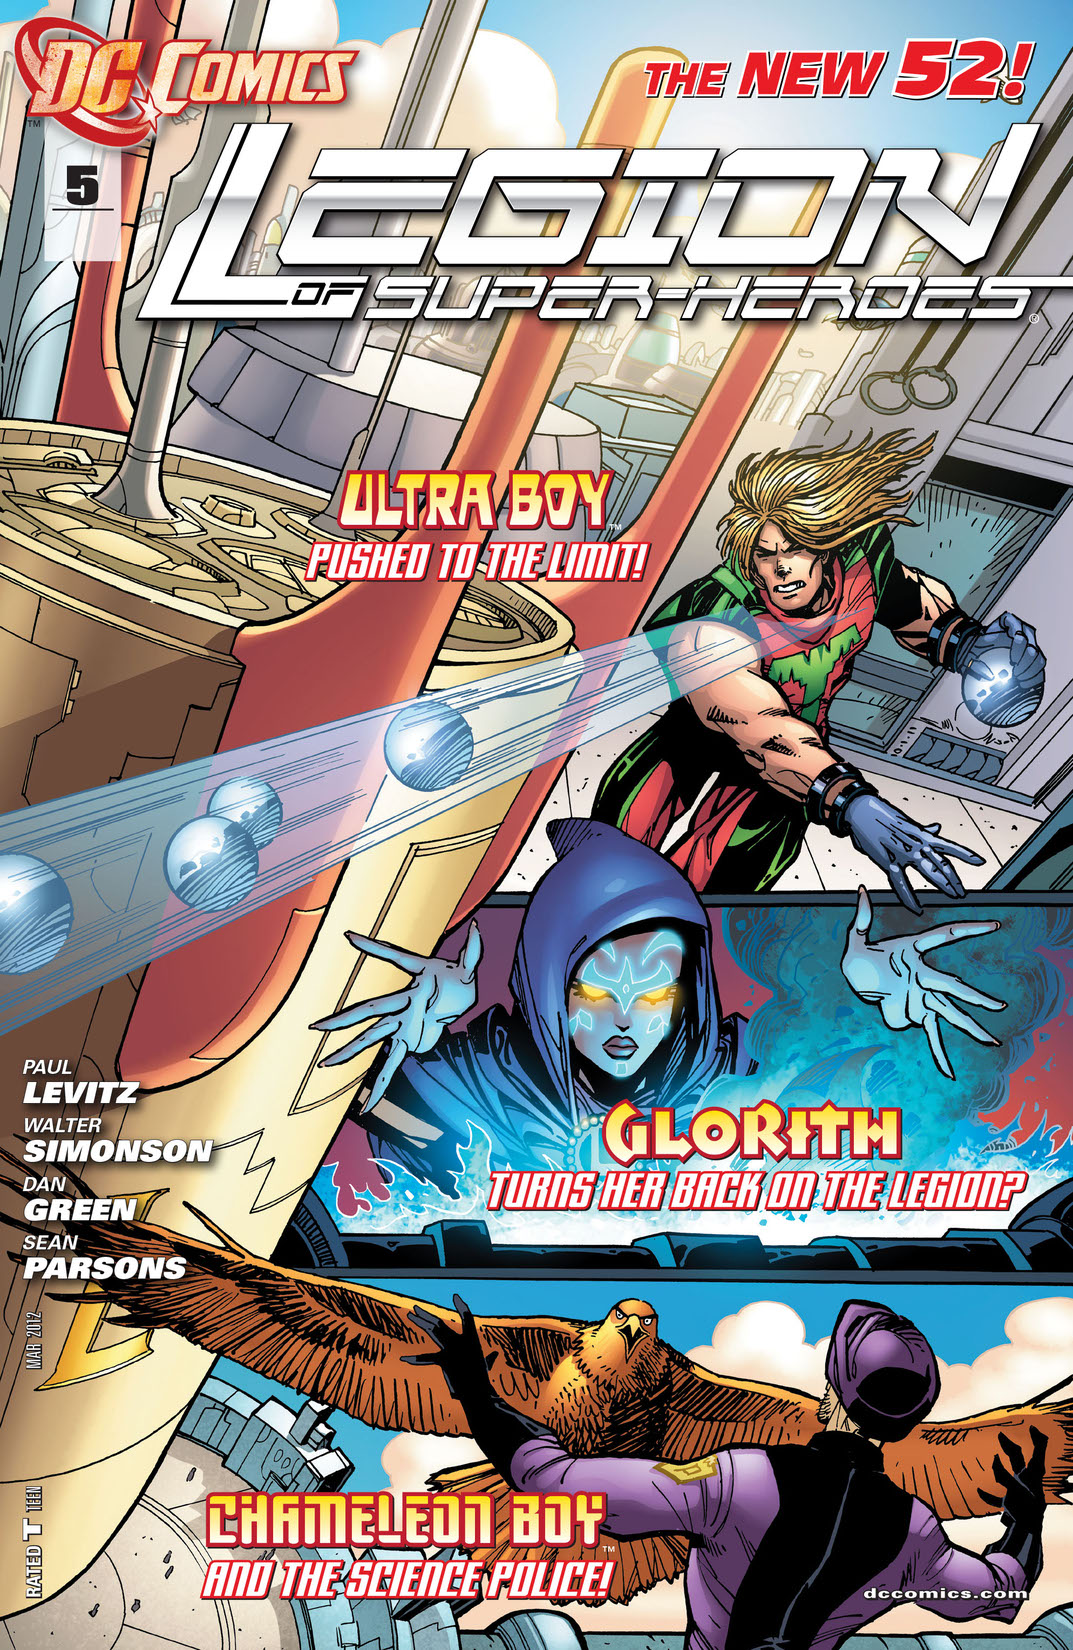 Legion of Super-Heroes (2011-) #5 preview images